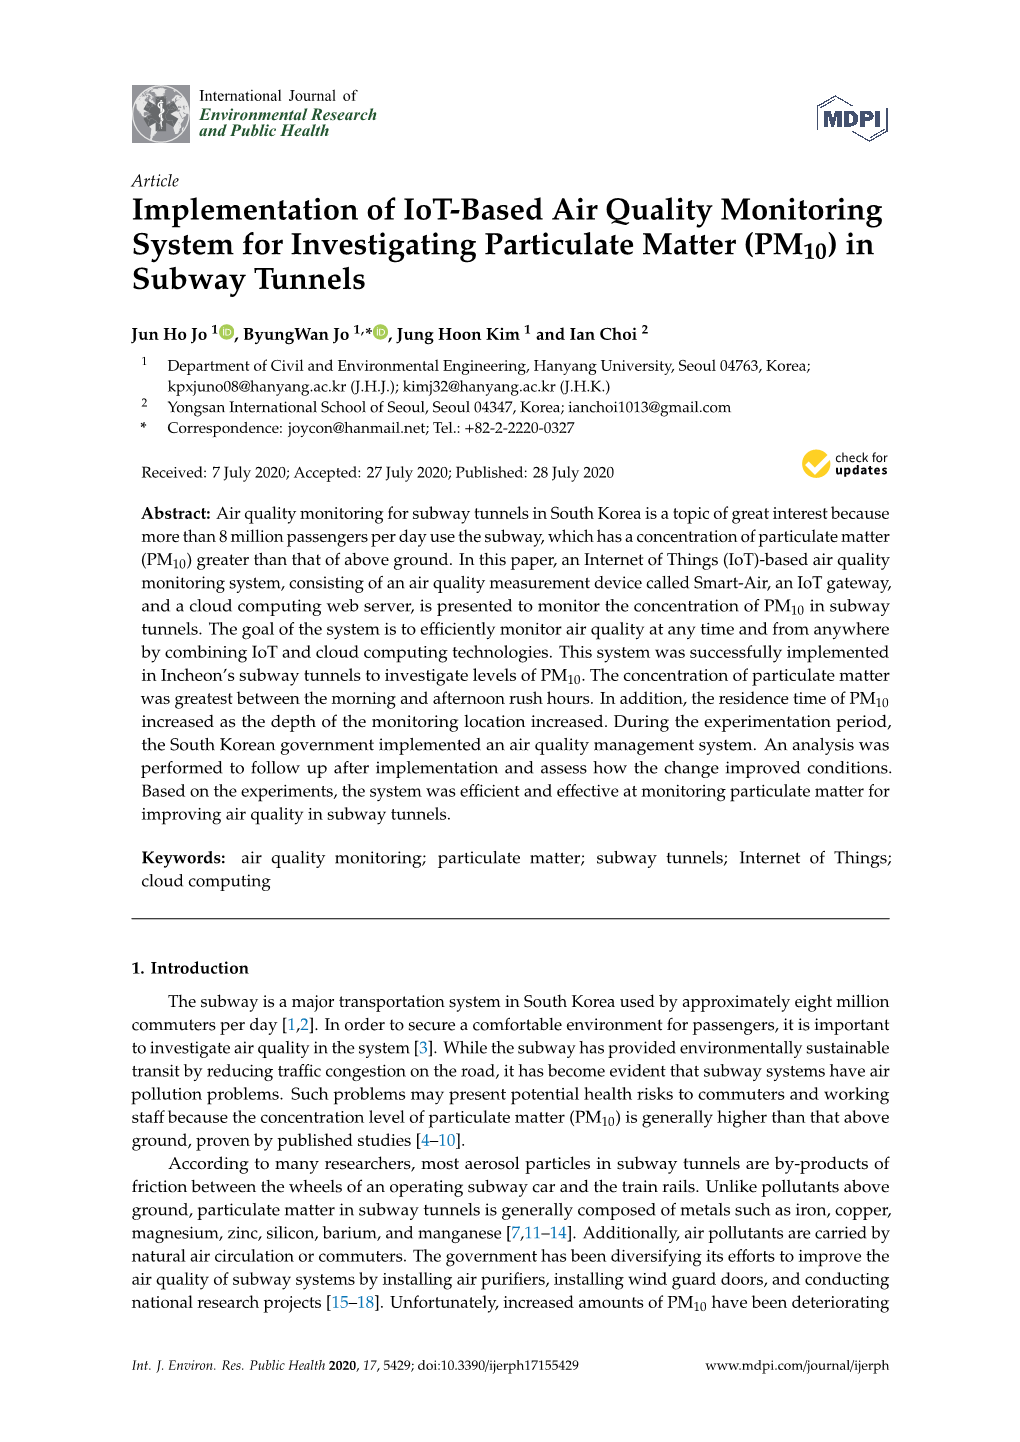 Implementation of Iot-Based Air Quality Monitoring System for Investigating Particulate Matter (PM10) in Subway Tunnels